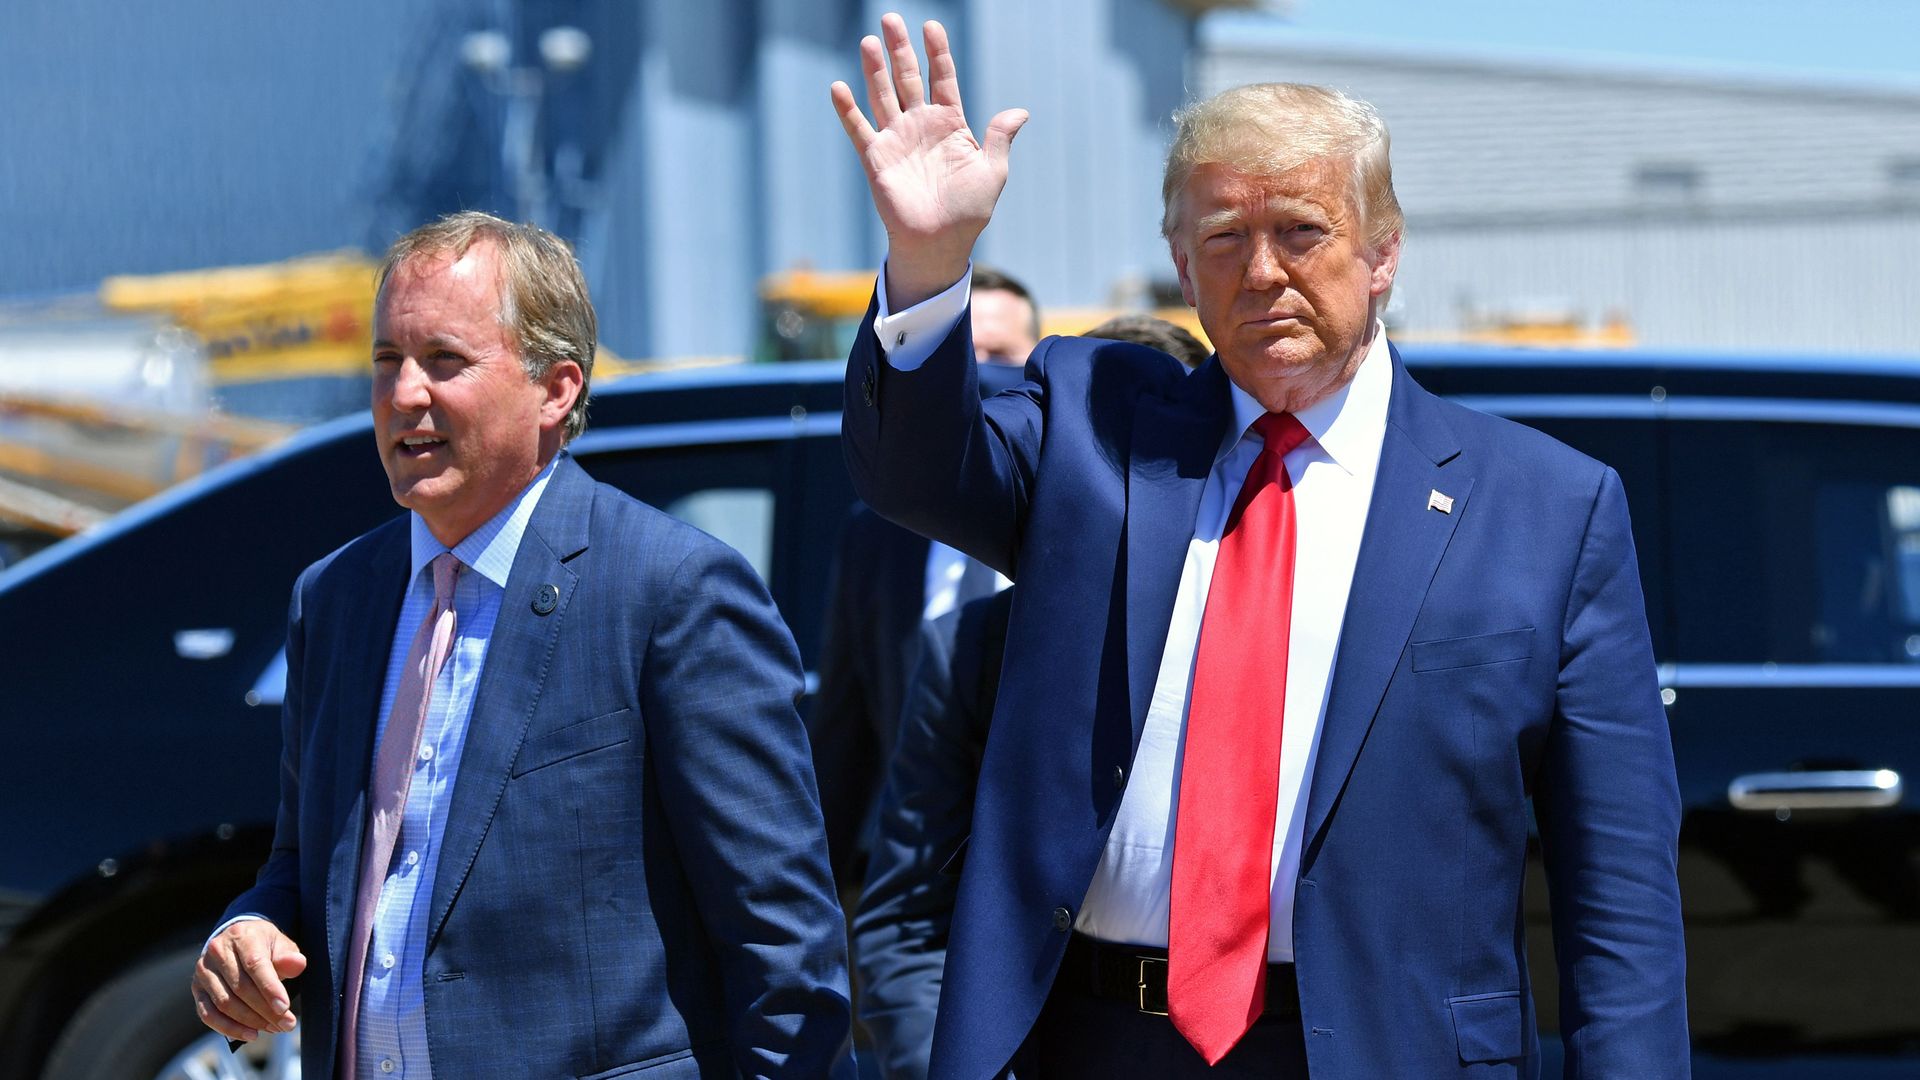 Texas AG Ken Paxton and President Trump in Texas in June. Photo: Nicholas Kamm/AFP via Getty Images